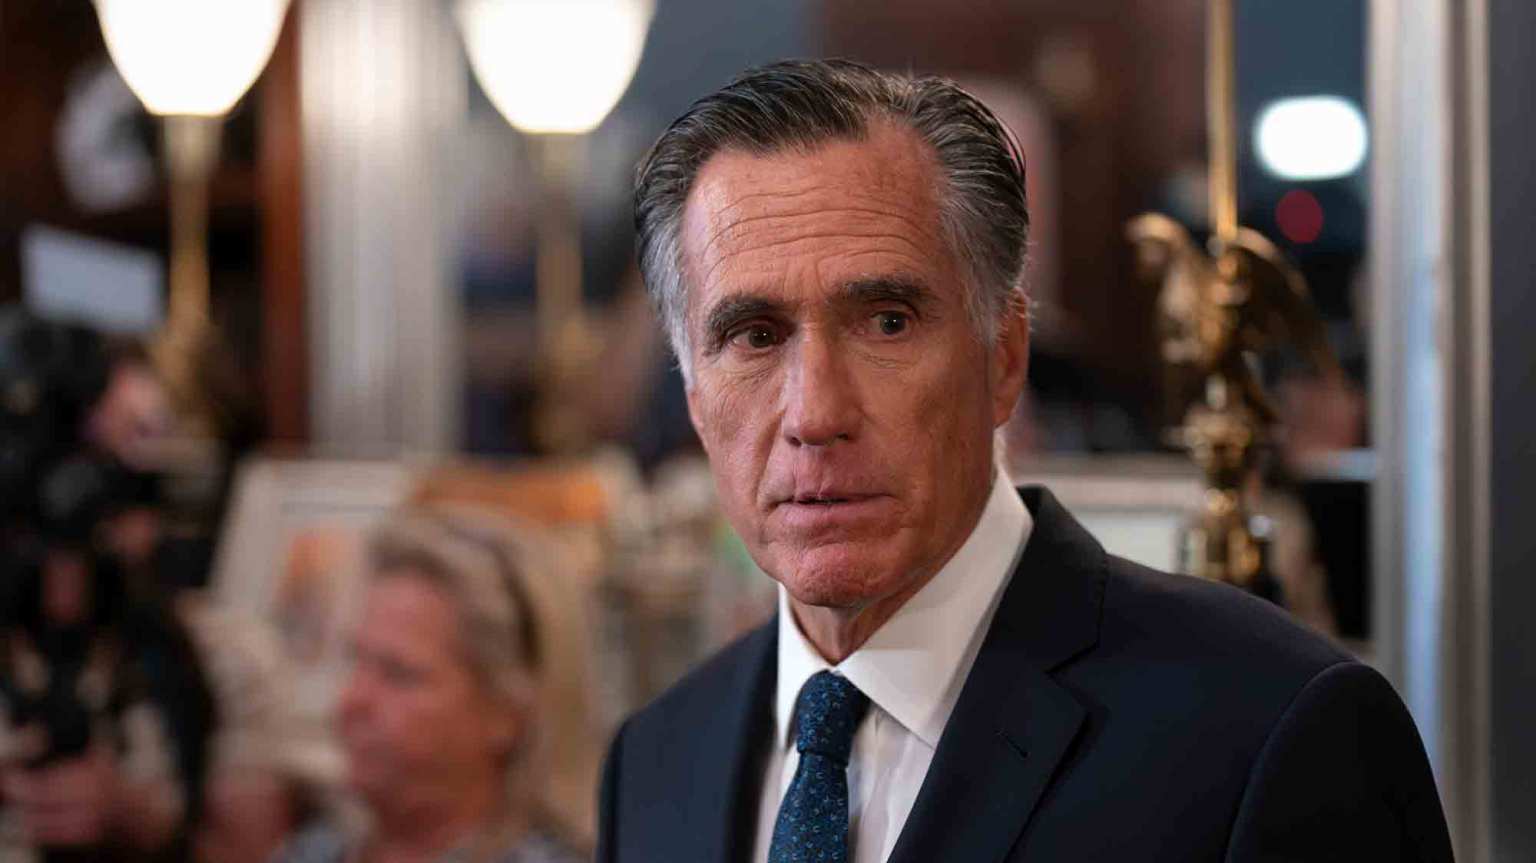 How the 47-Percent Video Drove Mitt Romney to Depression and Nearly Out of the 2012 Race (motherjones.com)